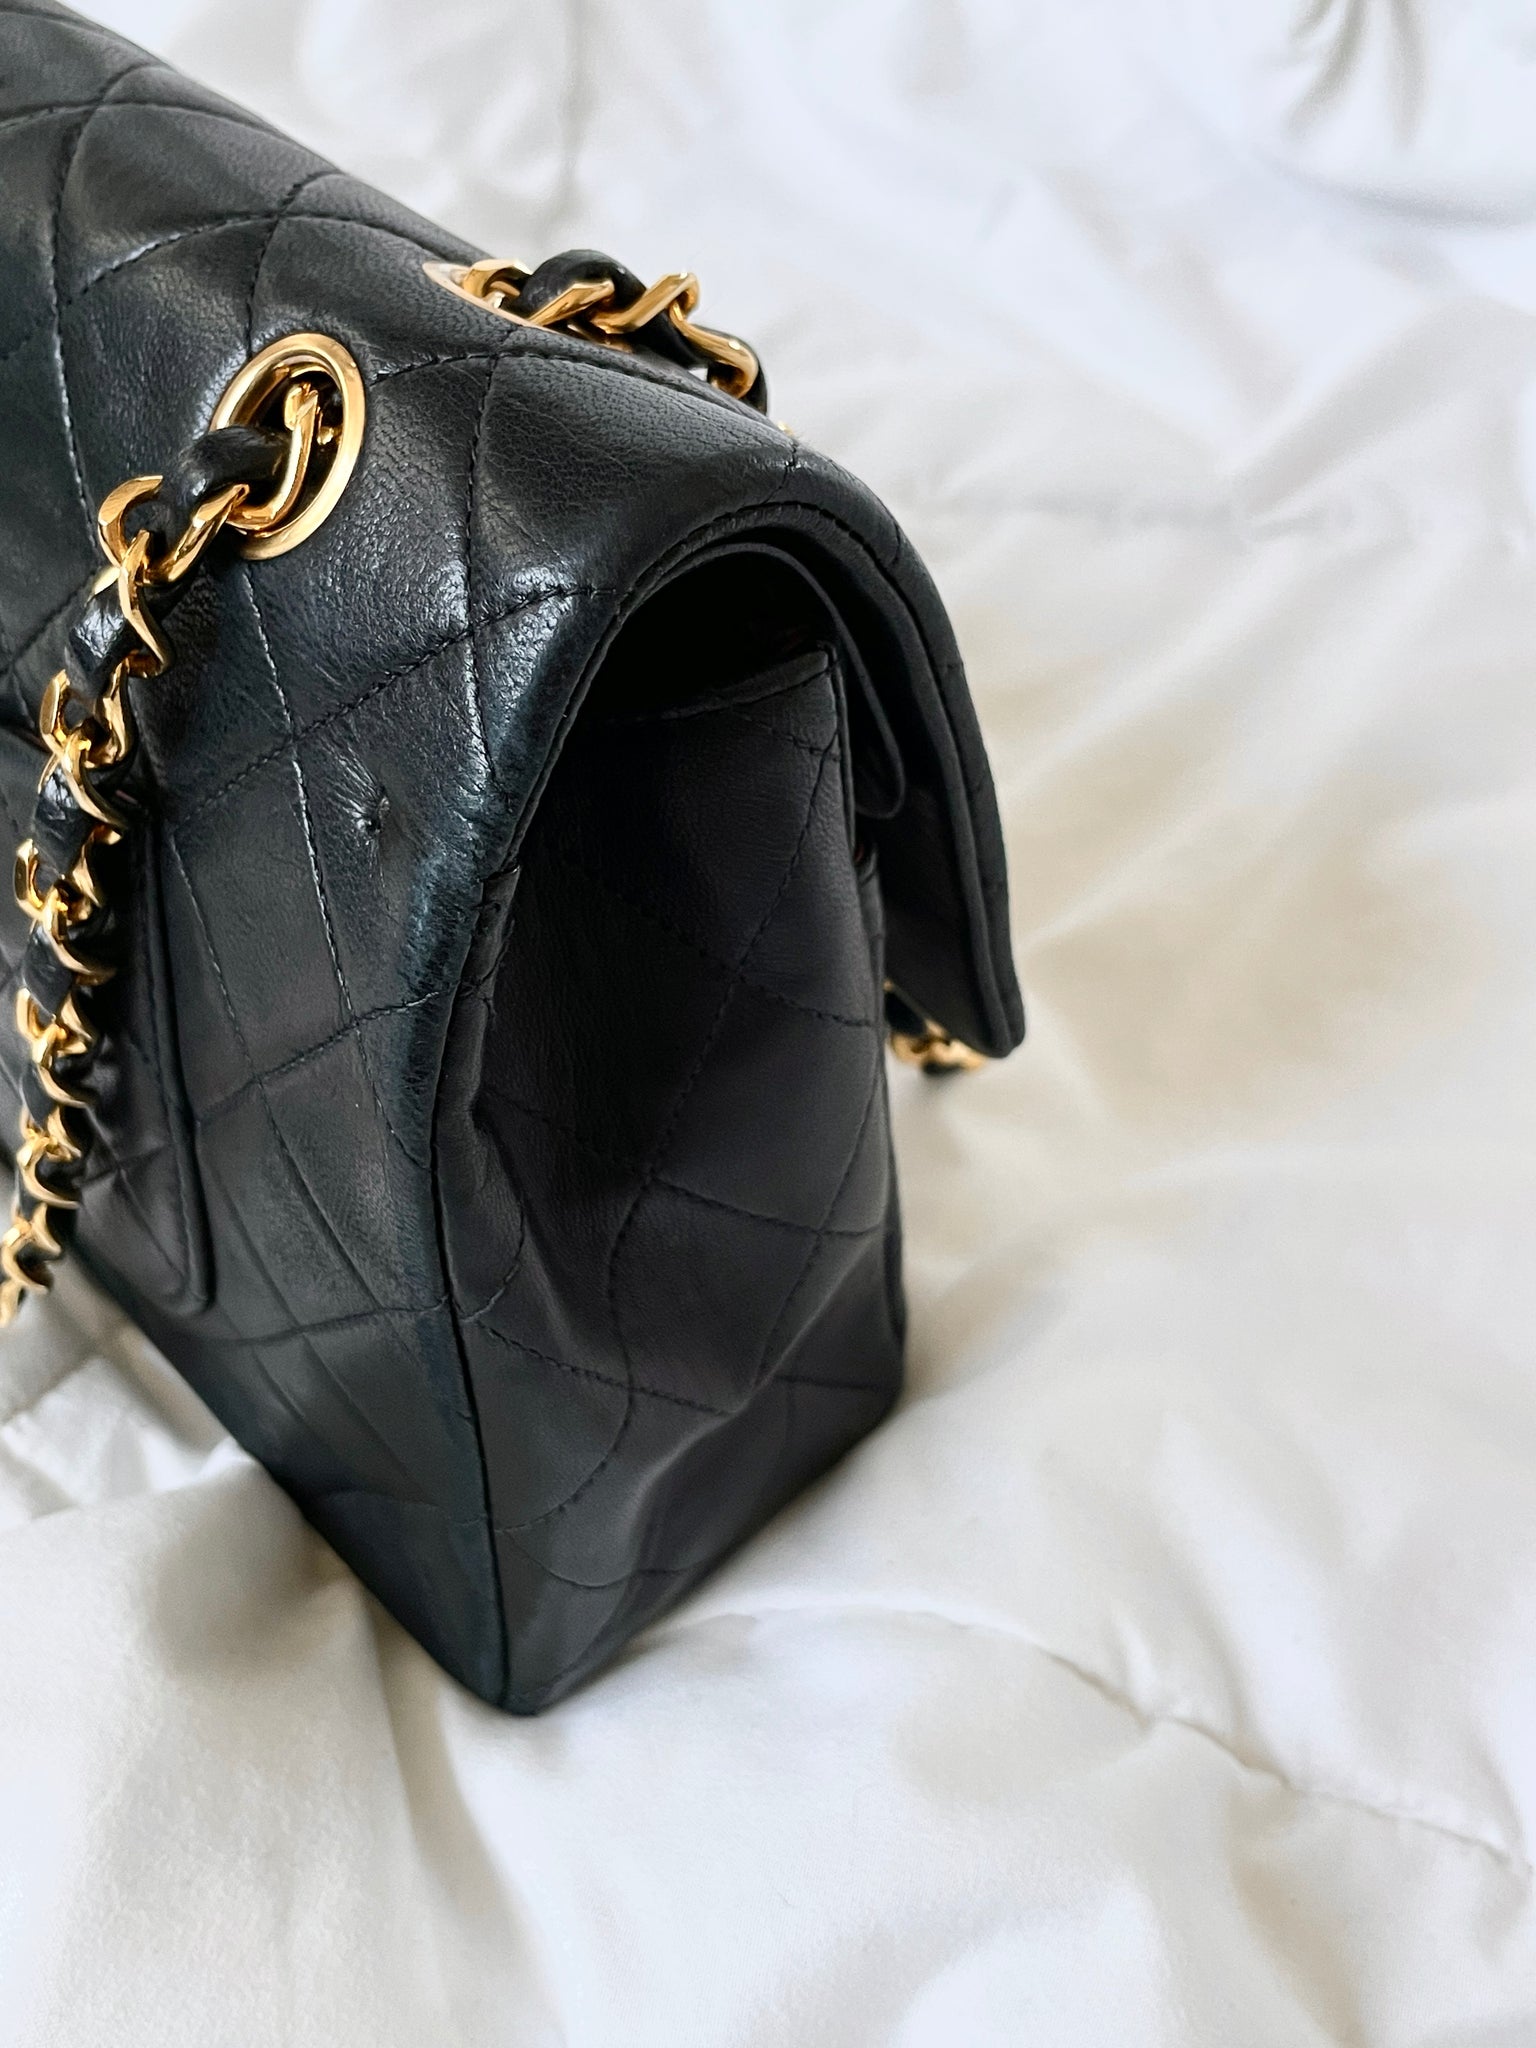 Chanel Classic Medium Double Flap Quilted Lambskin Bag